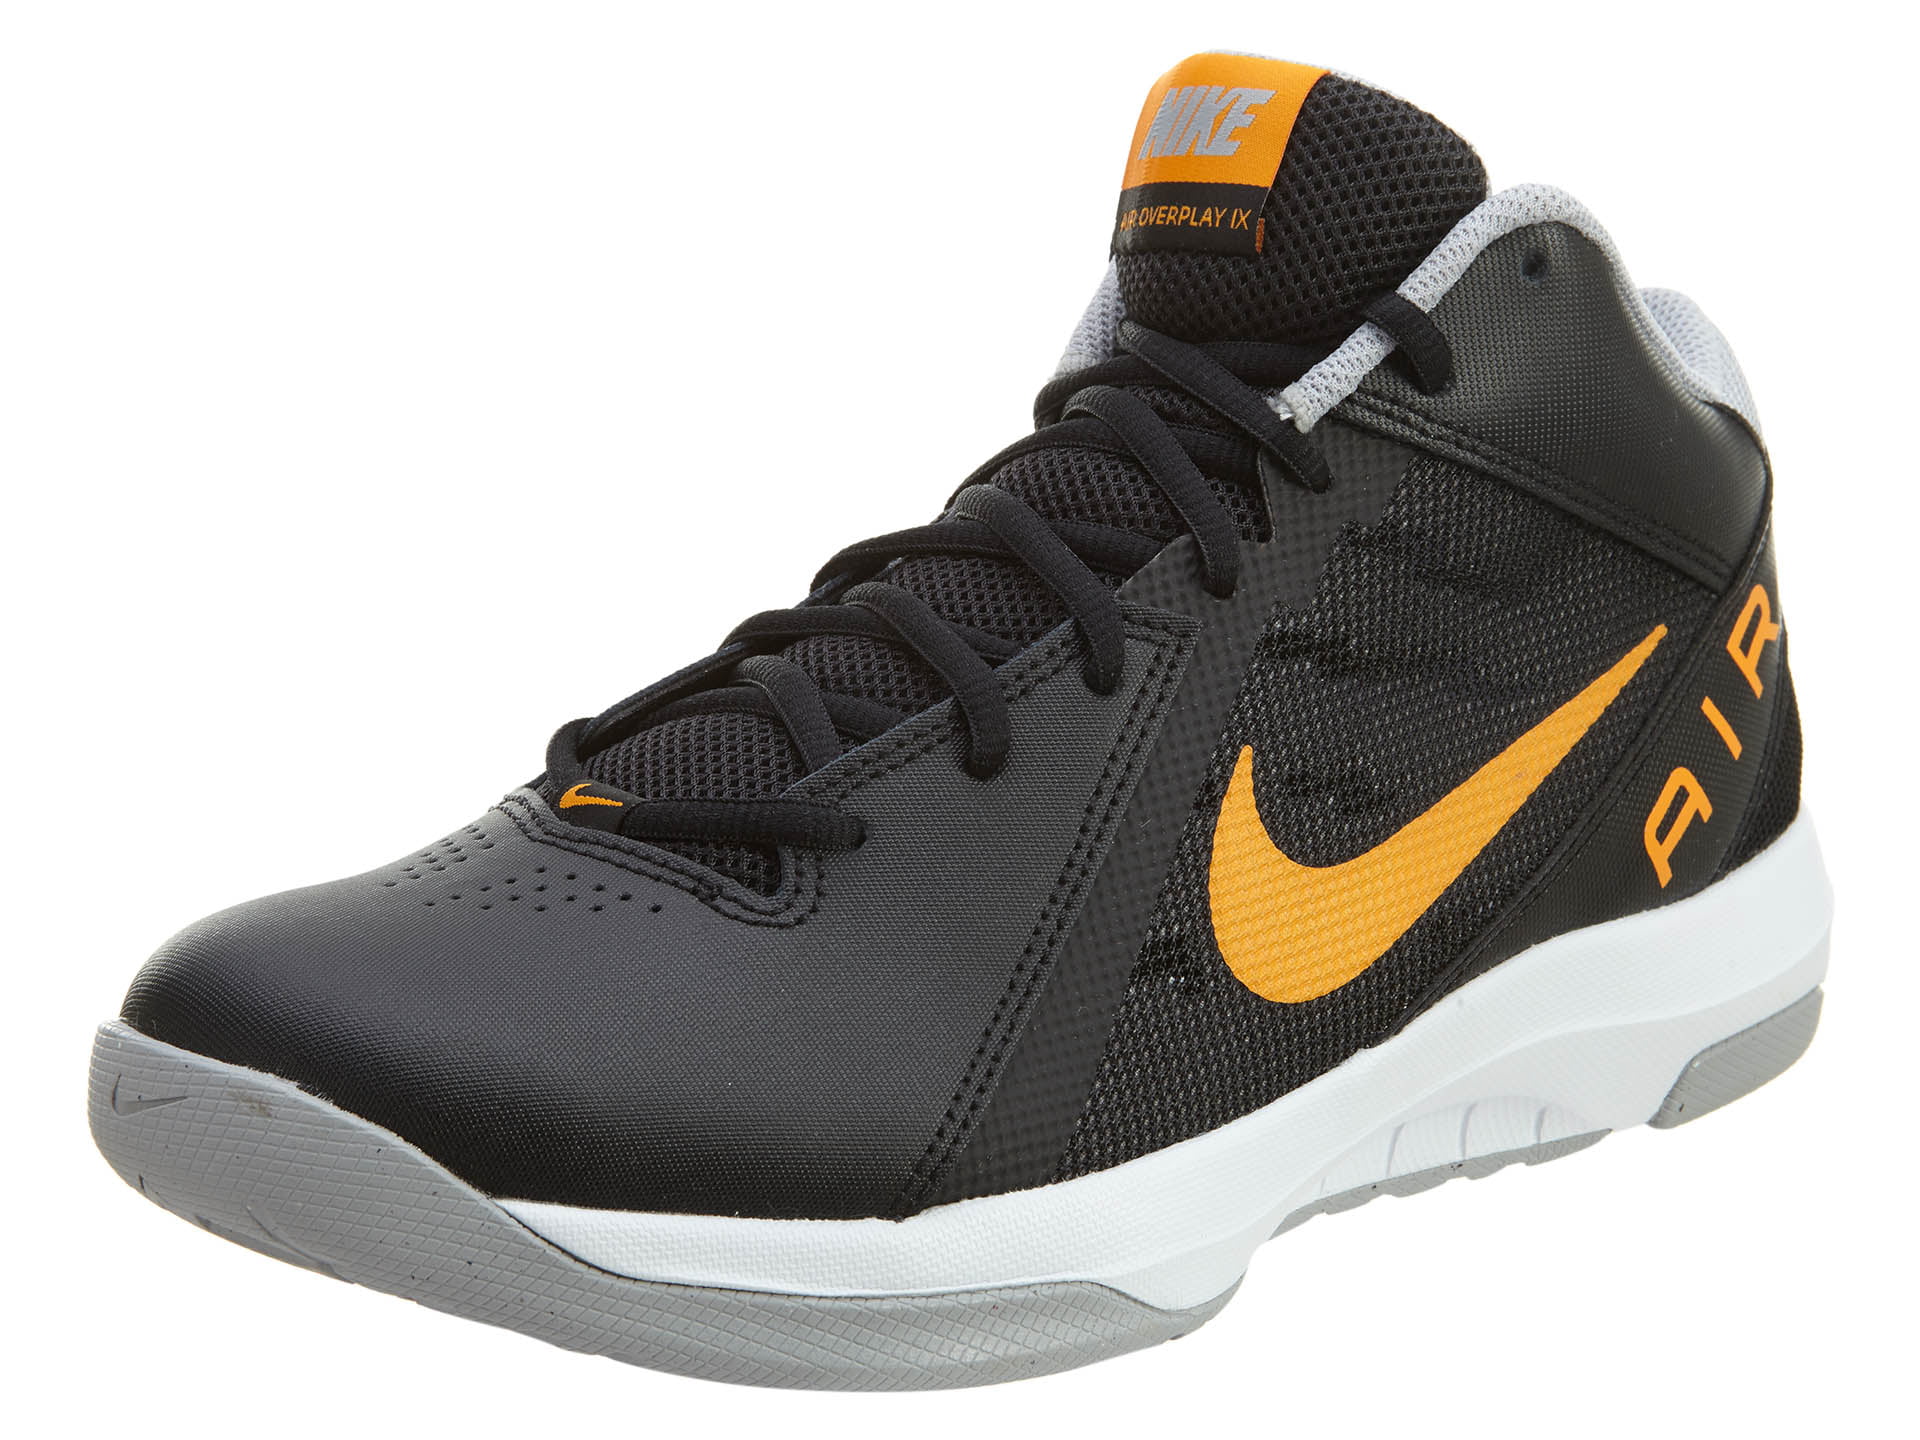 nike air overplay ix review